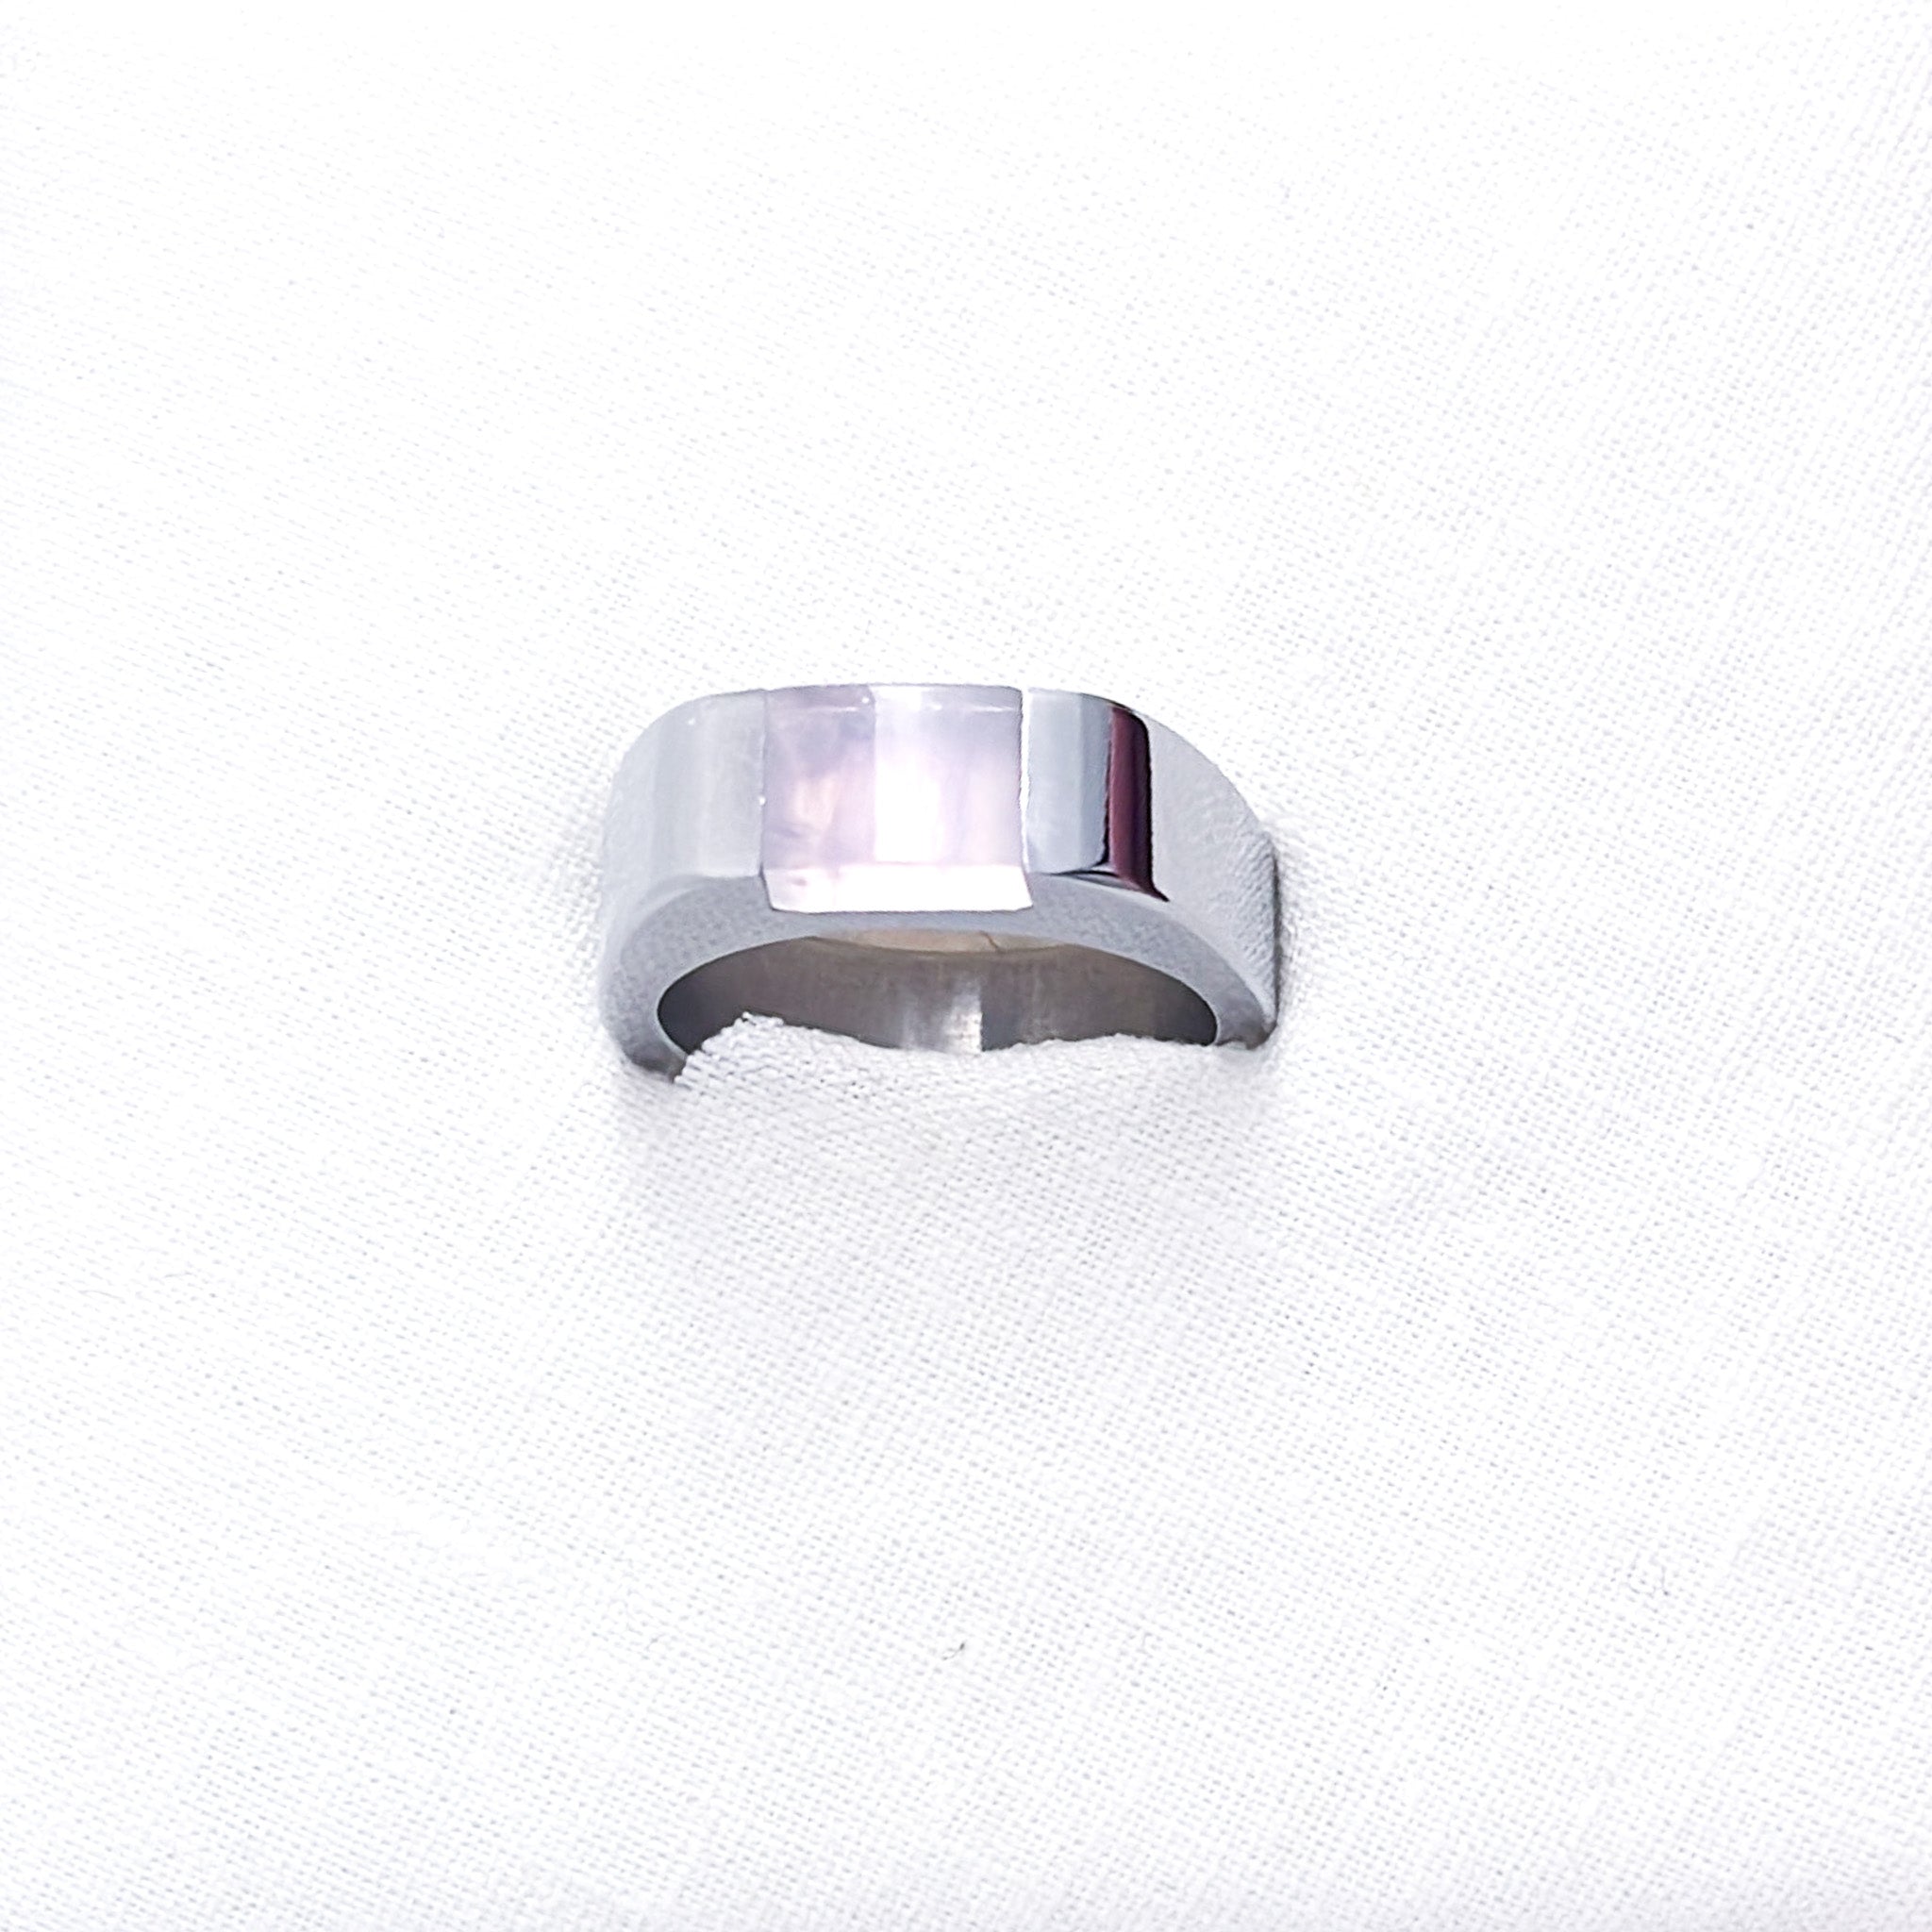 A stainless steel signet ring with an inset rose quartz stone